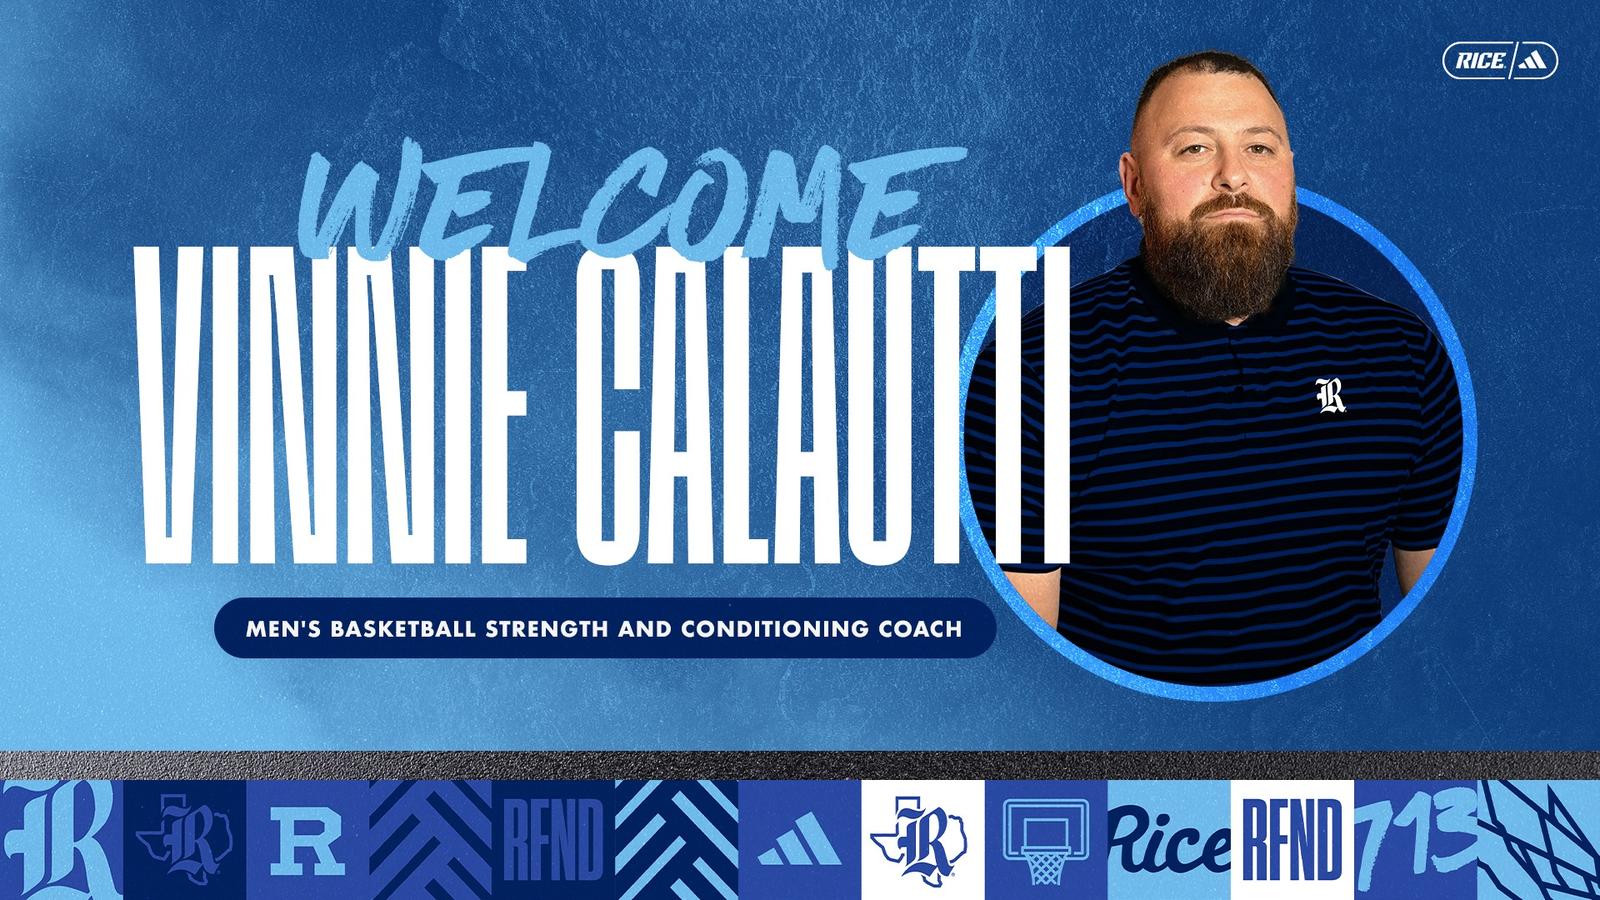 Vinnie Calautti Named Men’s Basketball Strength & Conditioning Coach